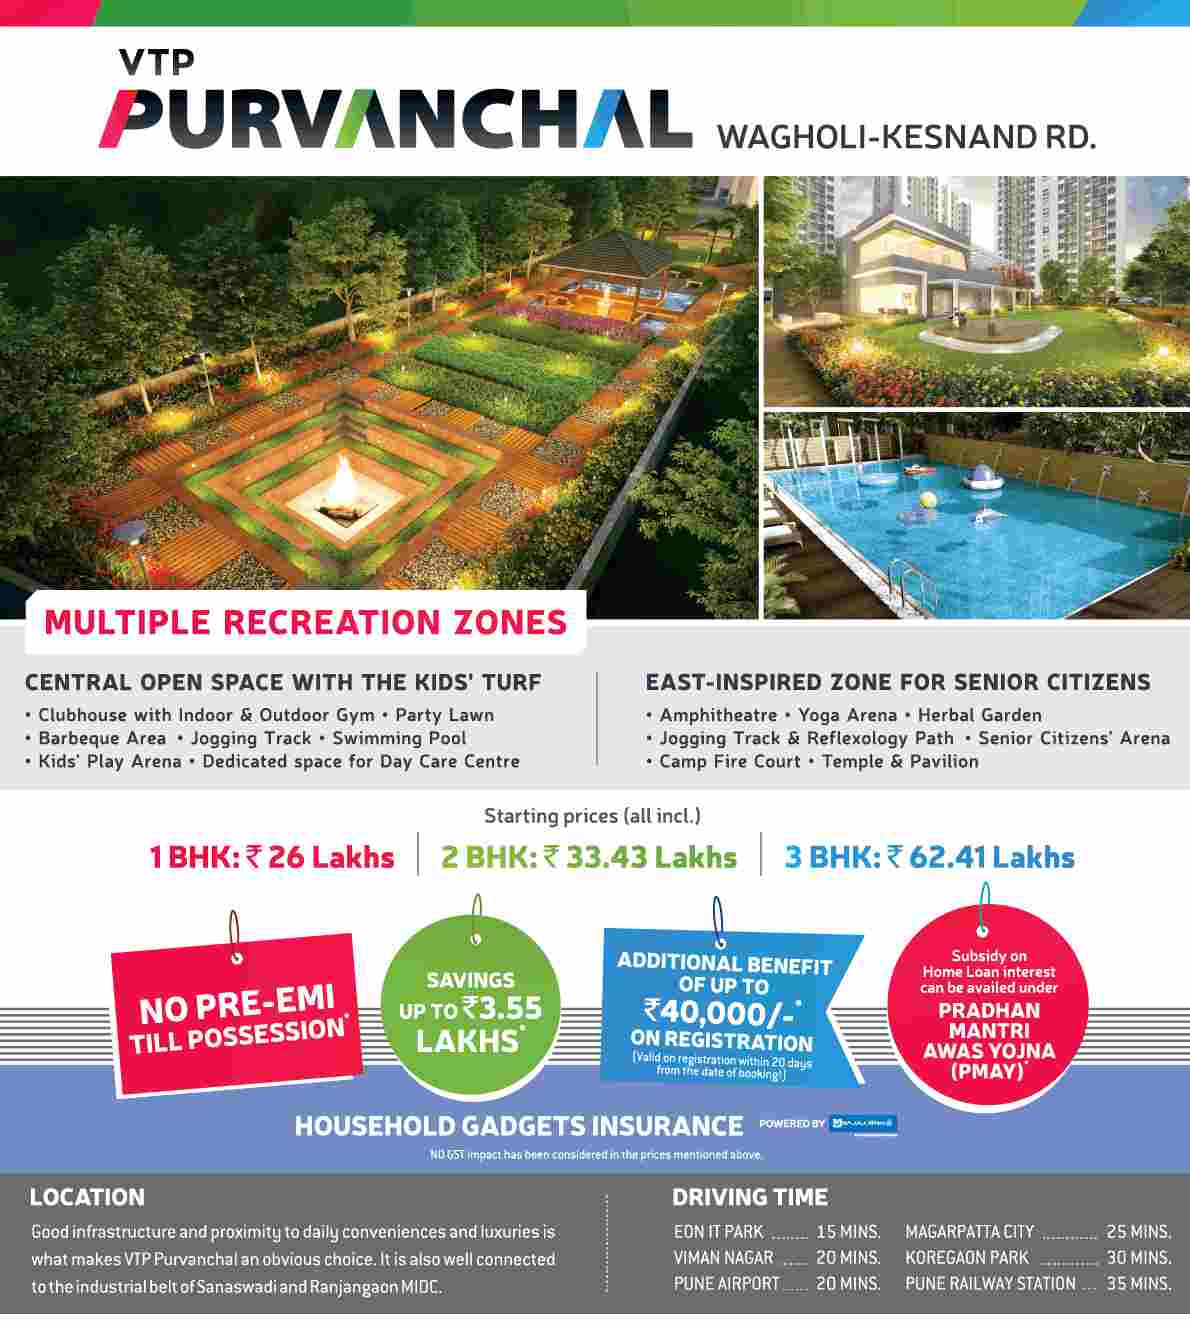 Experience good infrastructure & proximity to daily conveniences & luxuries by residing at VTP Purvanchal in Pune